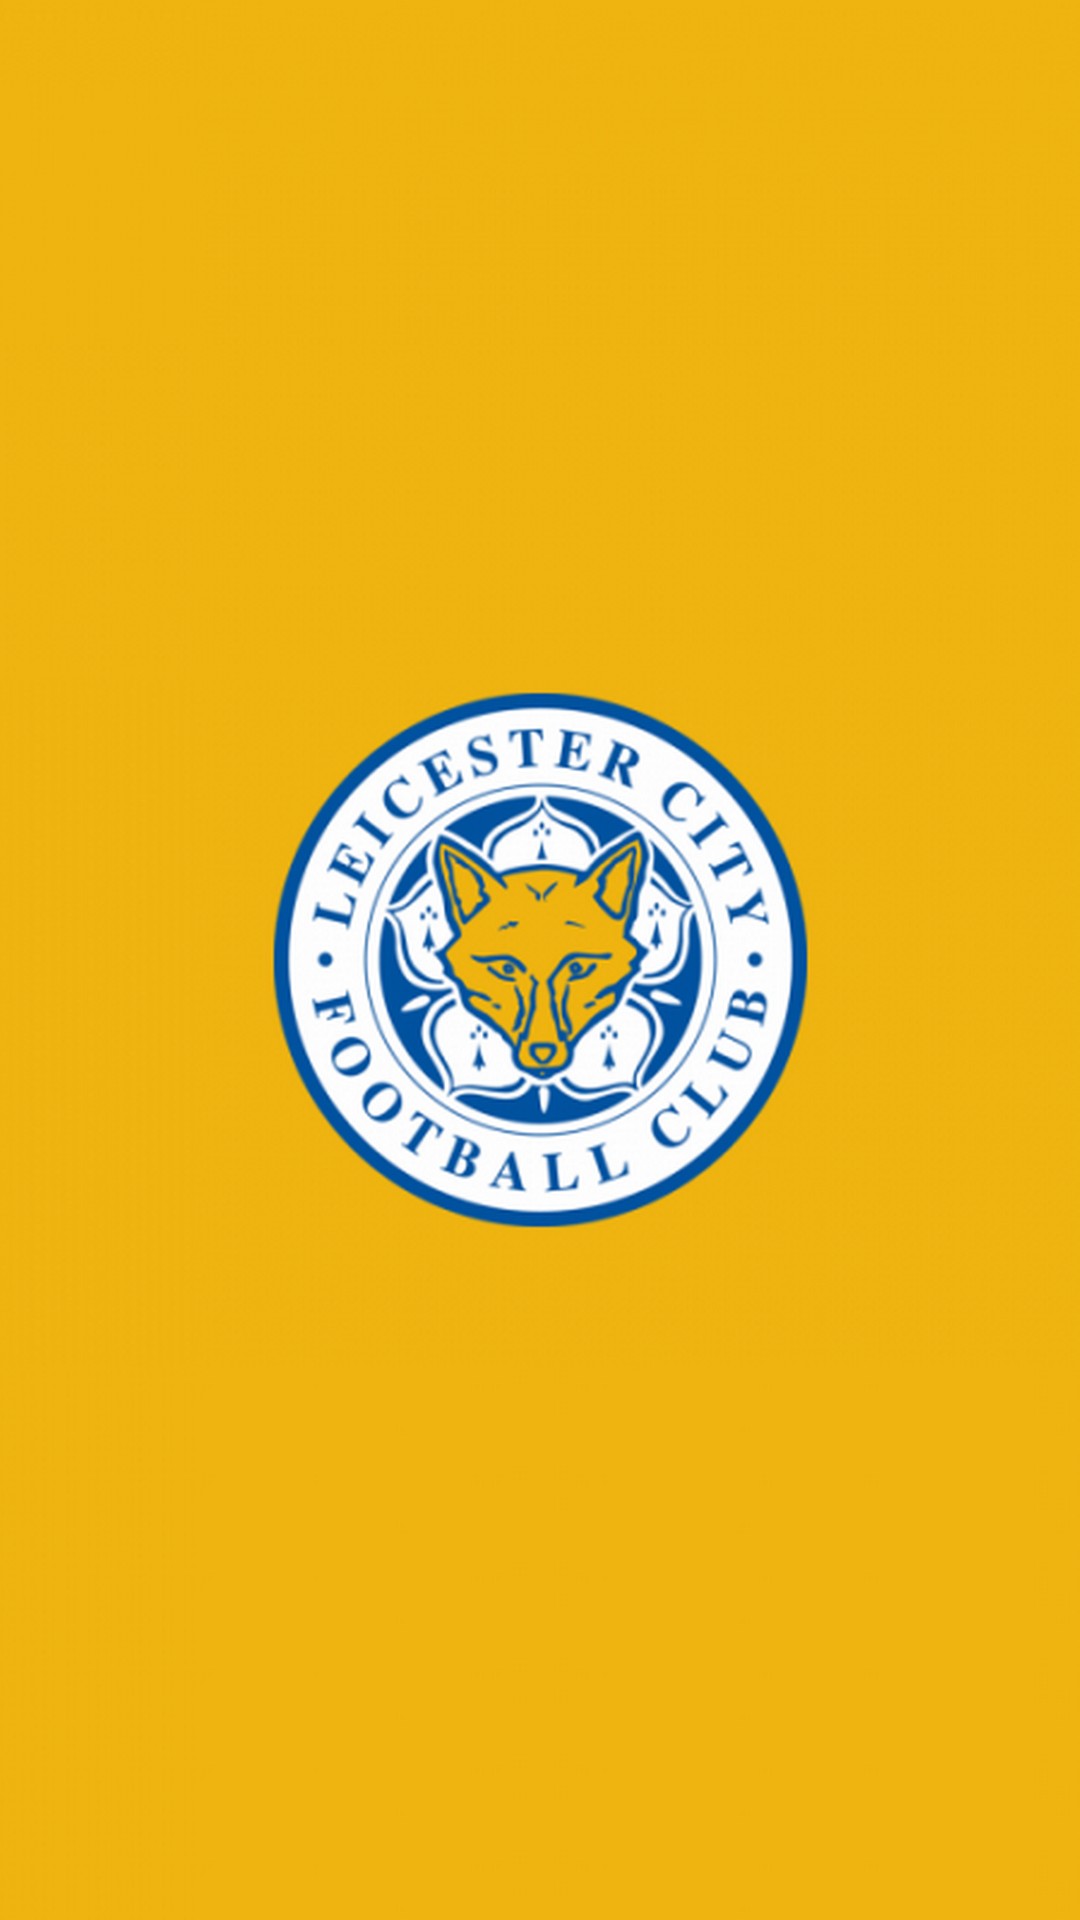 Leicester City Logo Wallpaper iPhone HD with high-resolution 1080x1920 pixel. You can use this wallpaper for your Desktop Computers, Mac Screensavers, Windows Backgrounds, iPhone Wallpapers, Tablet or Android Lock screen and another Mobile device